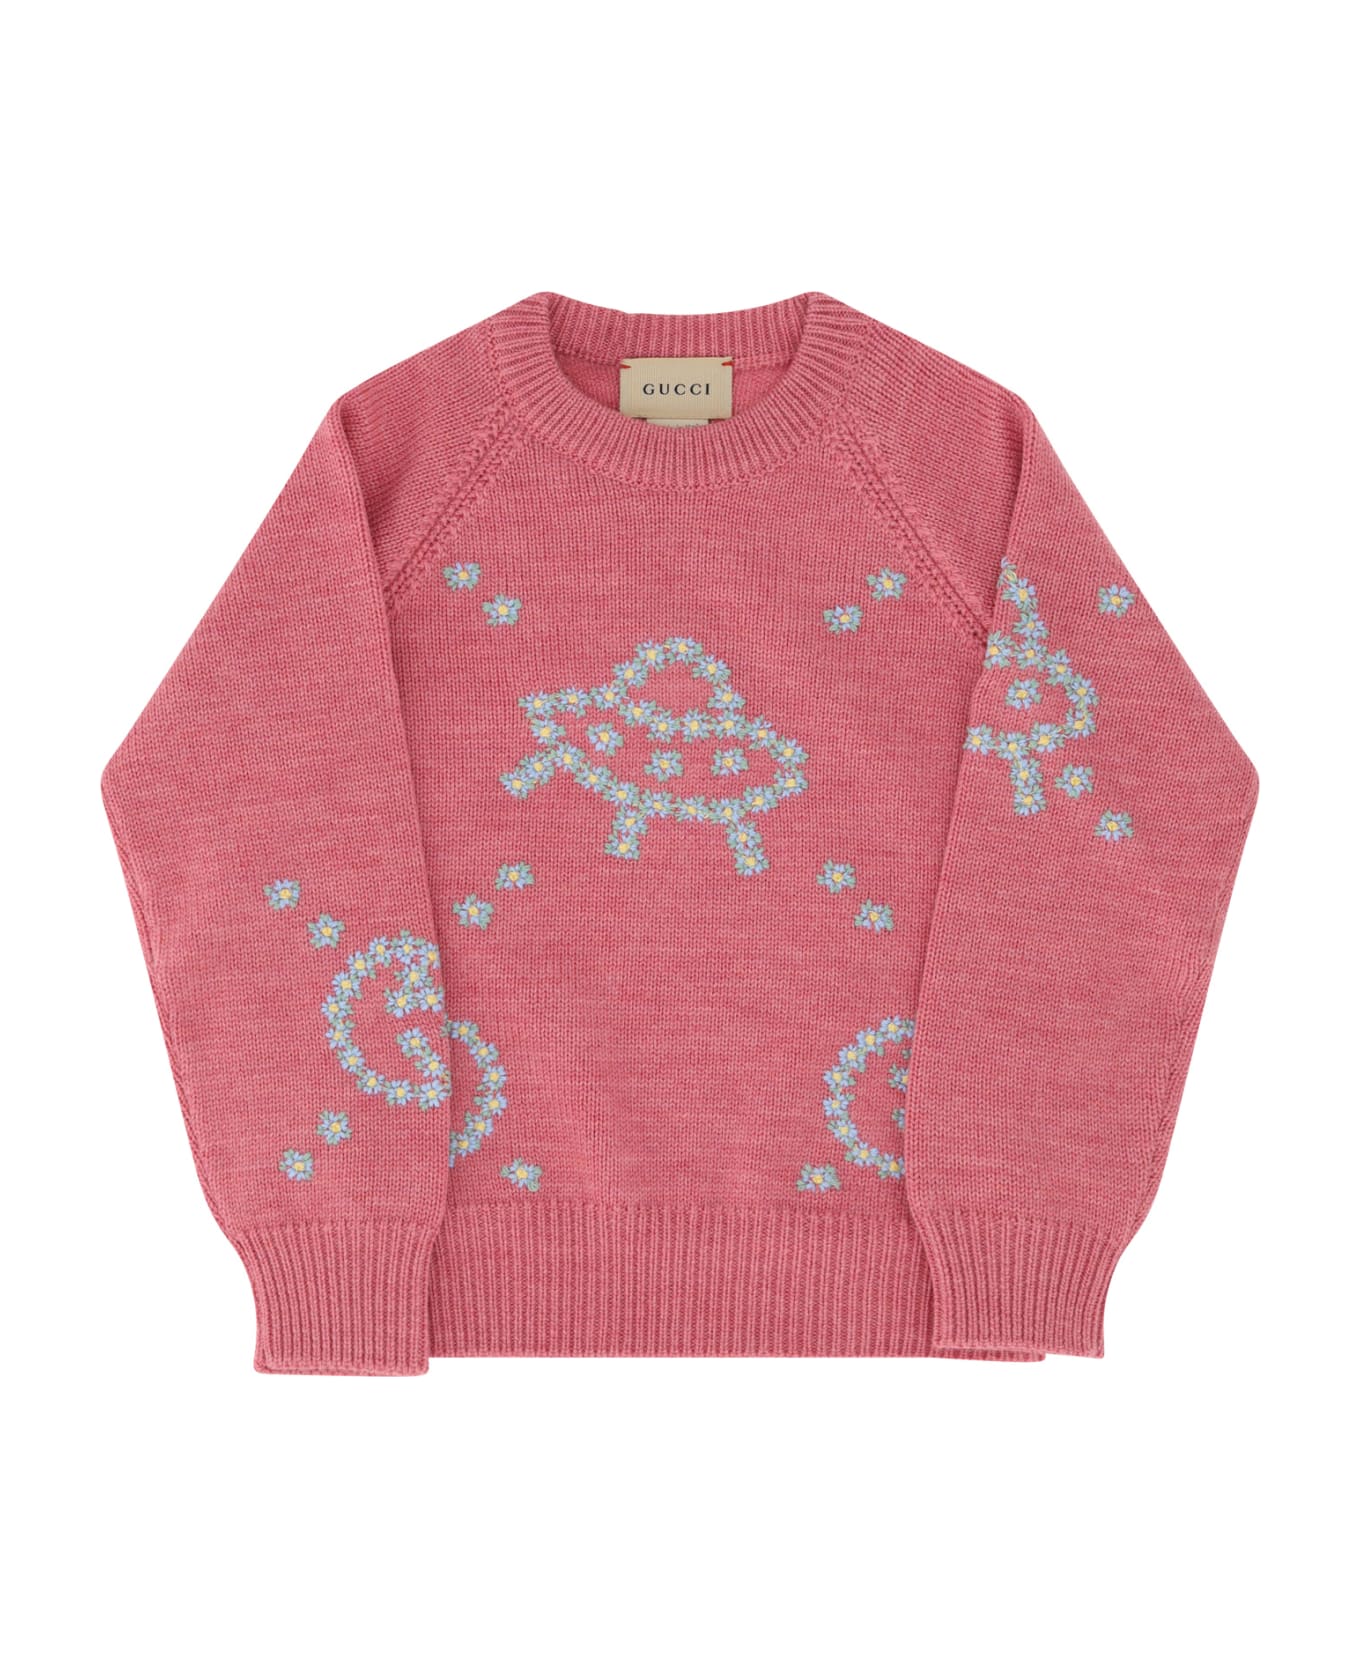 Gucci Sweater For Girl